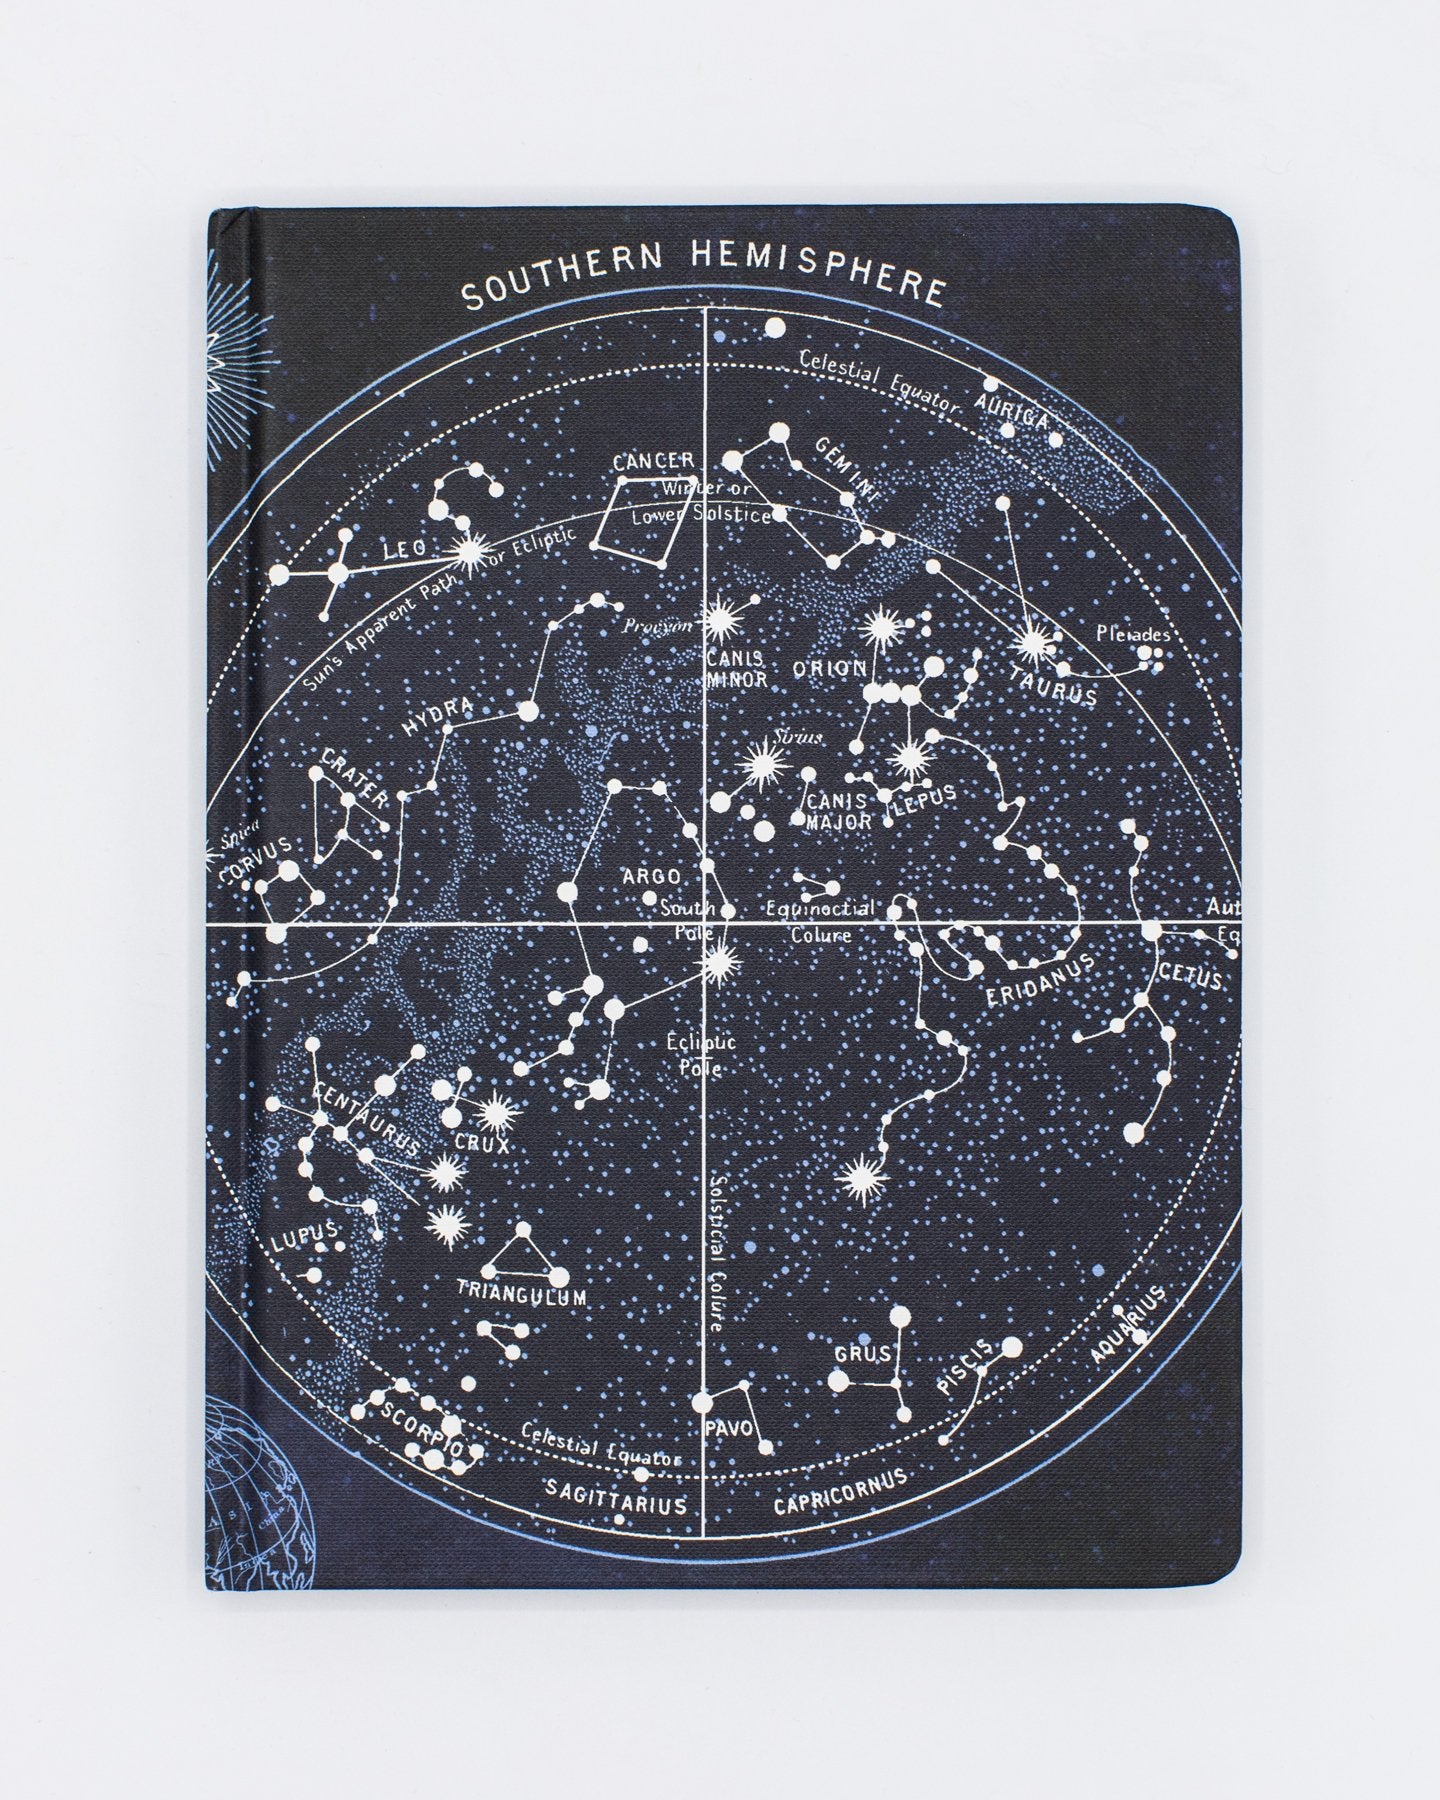 Constellations Hardcover Notebook - Dot Grid